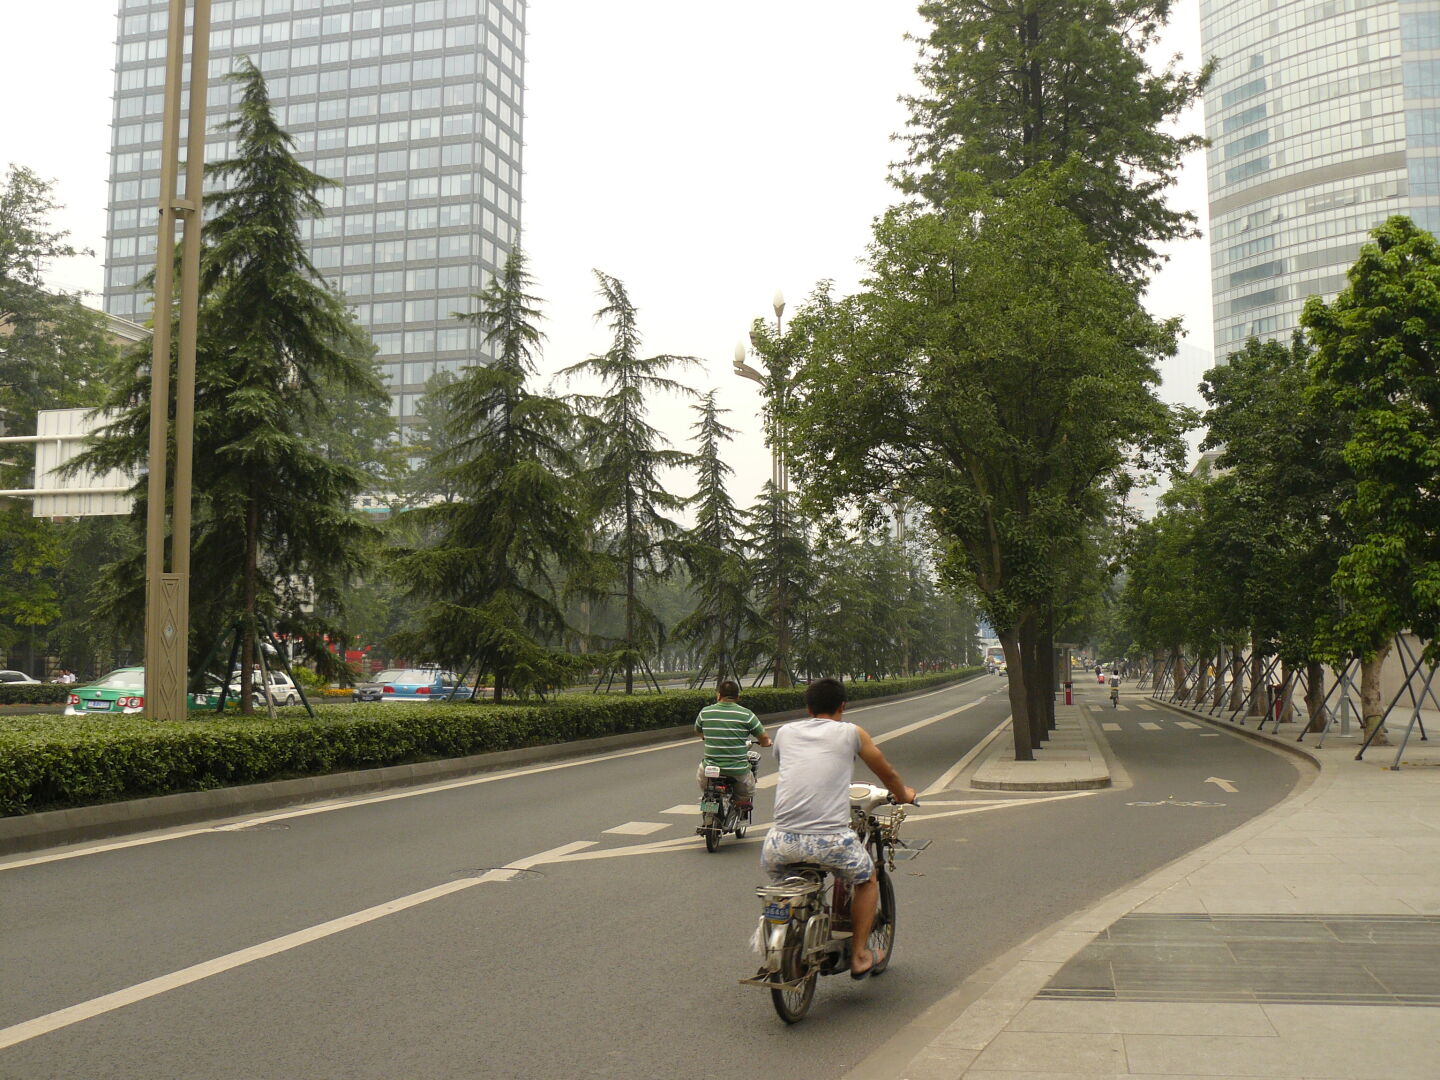 The road was split into different lanes by rows of trees. There is a lot of green throughout the city.